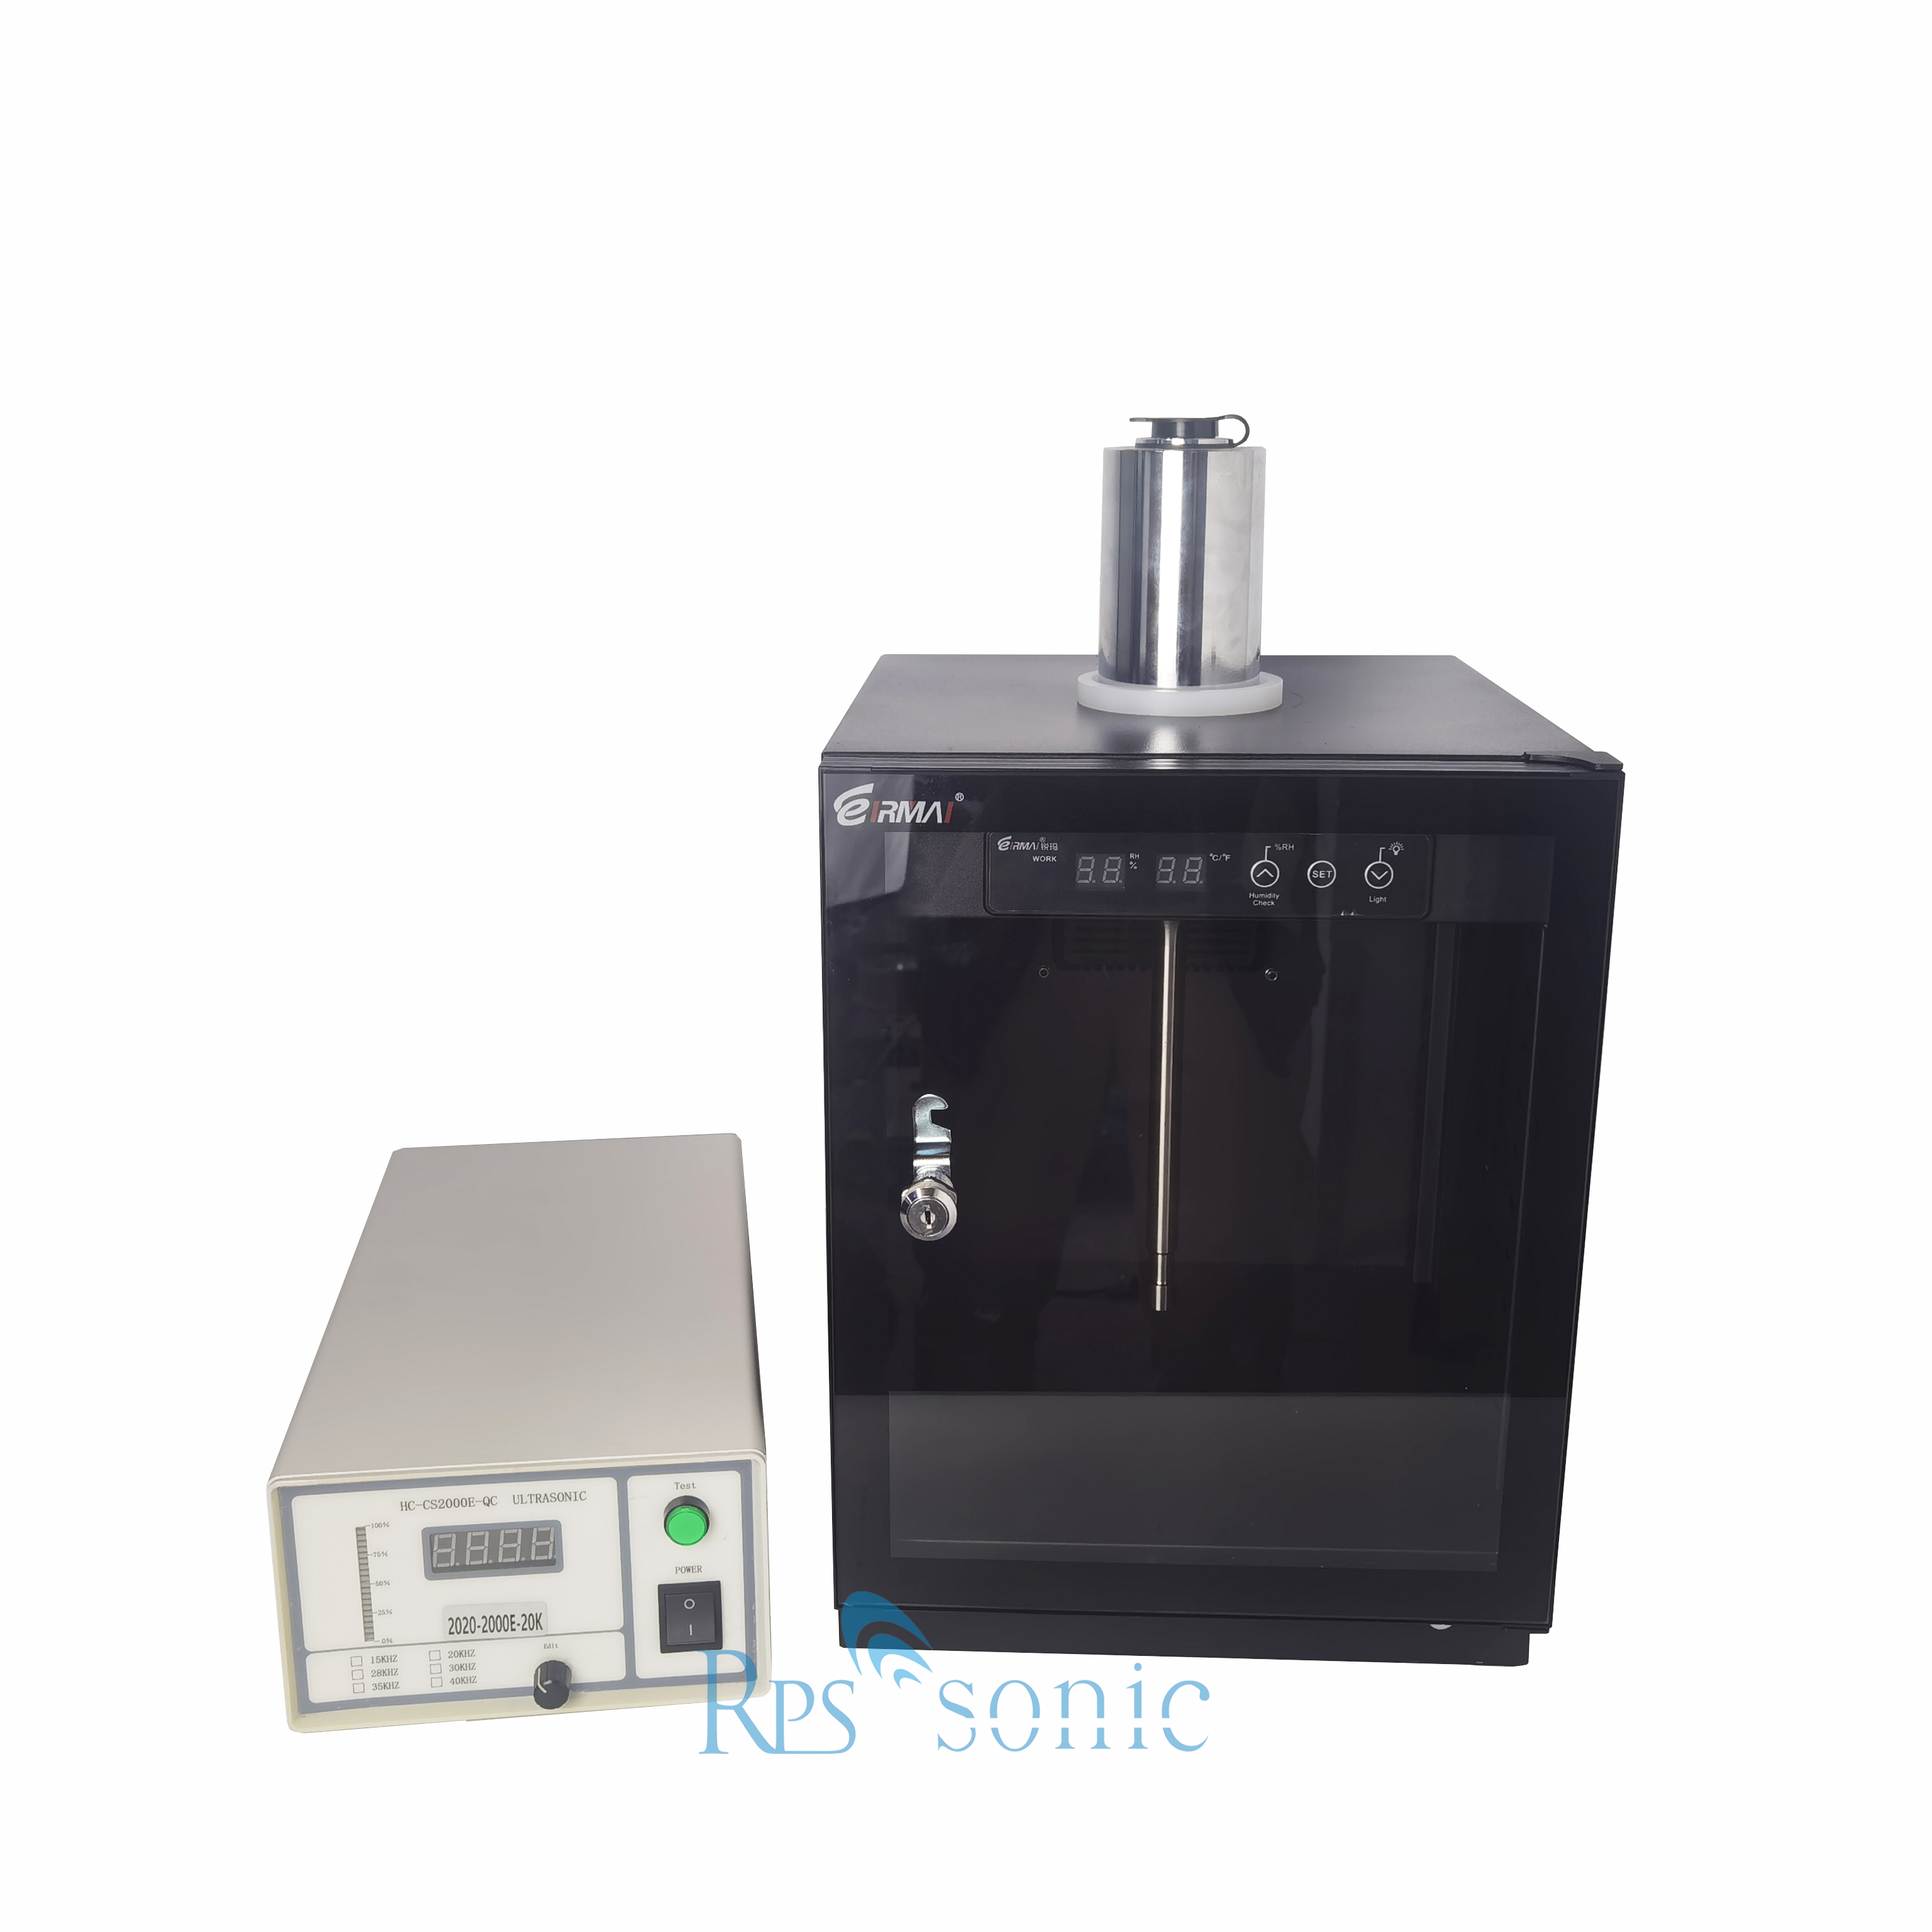 20Khz 1000w Ultrasonic laboratory sonicator with Sound Enclosure for extracting